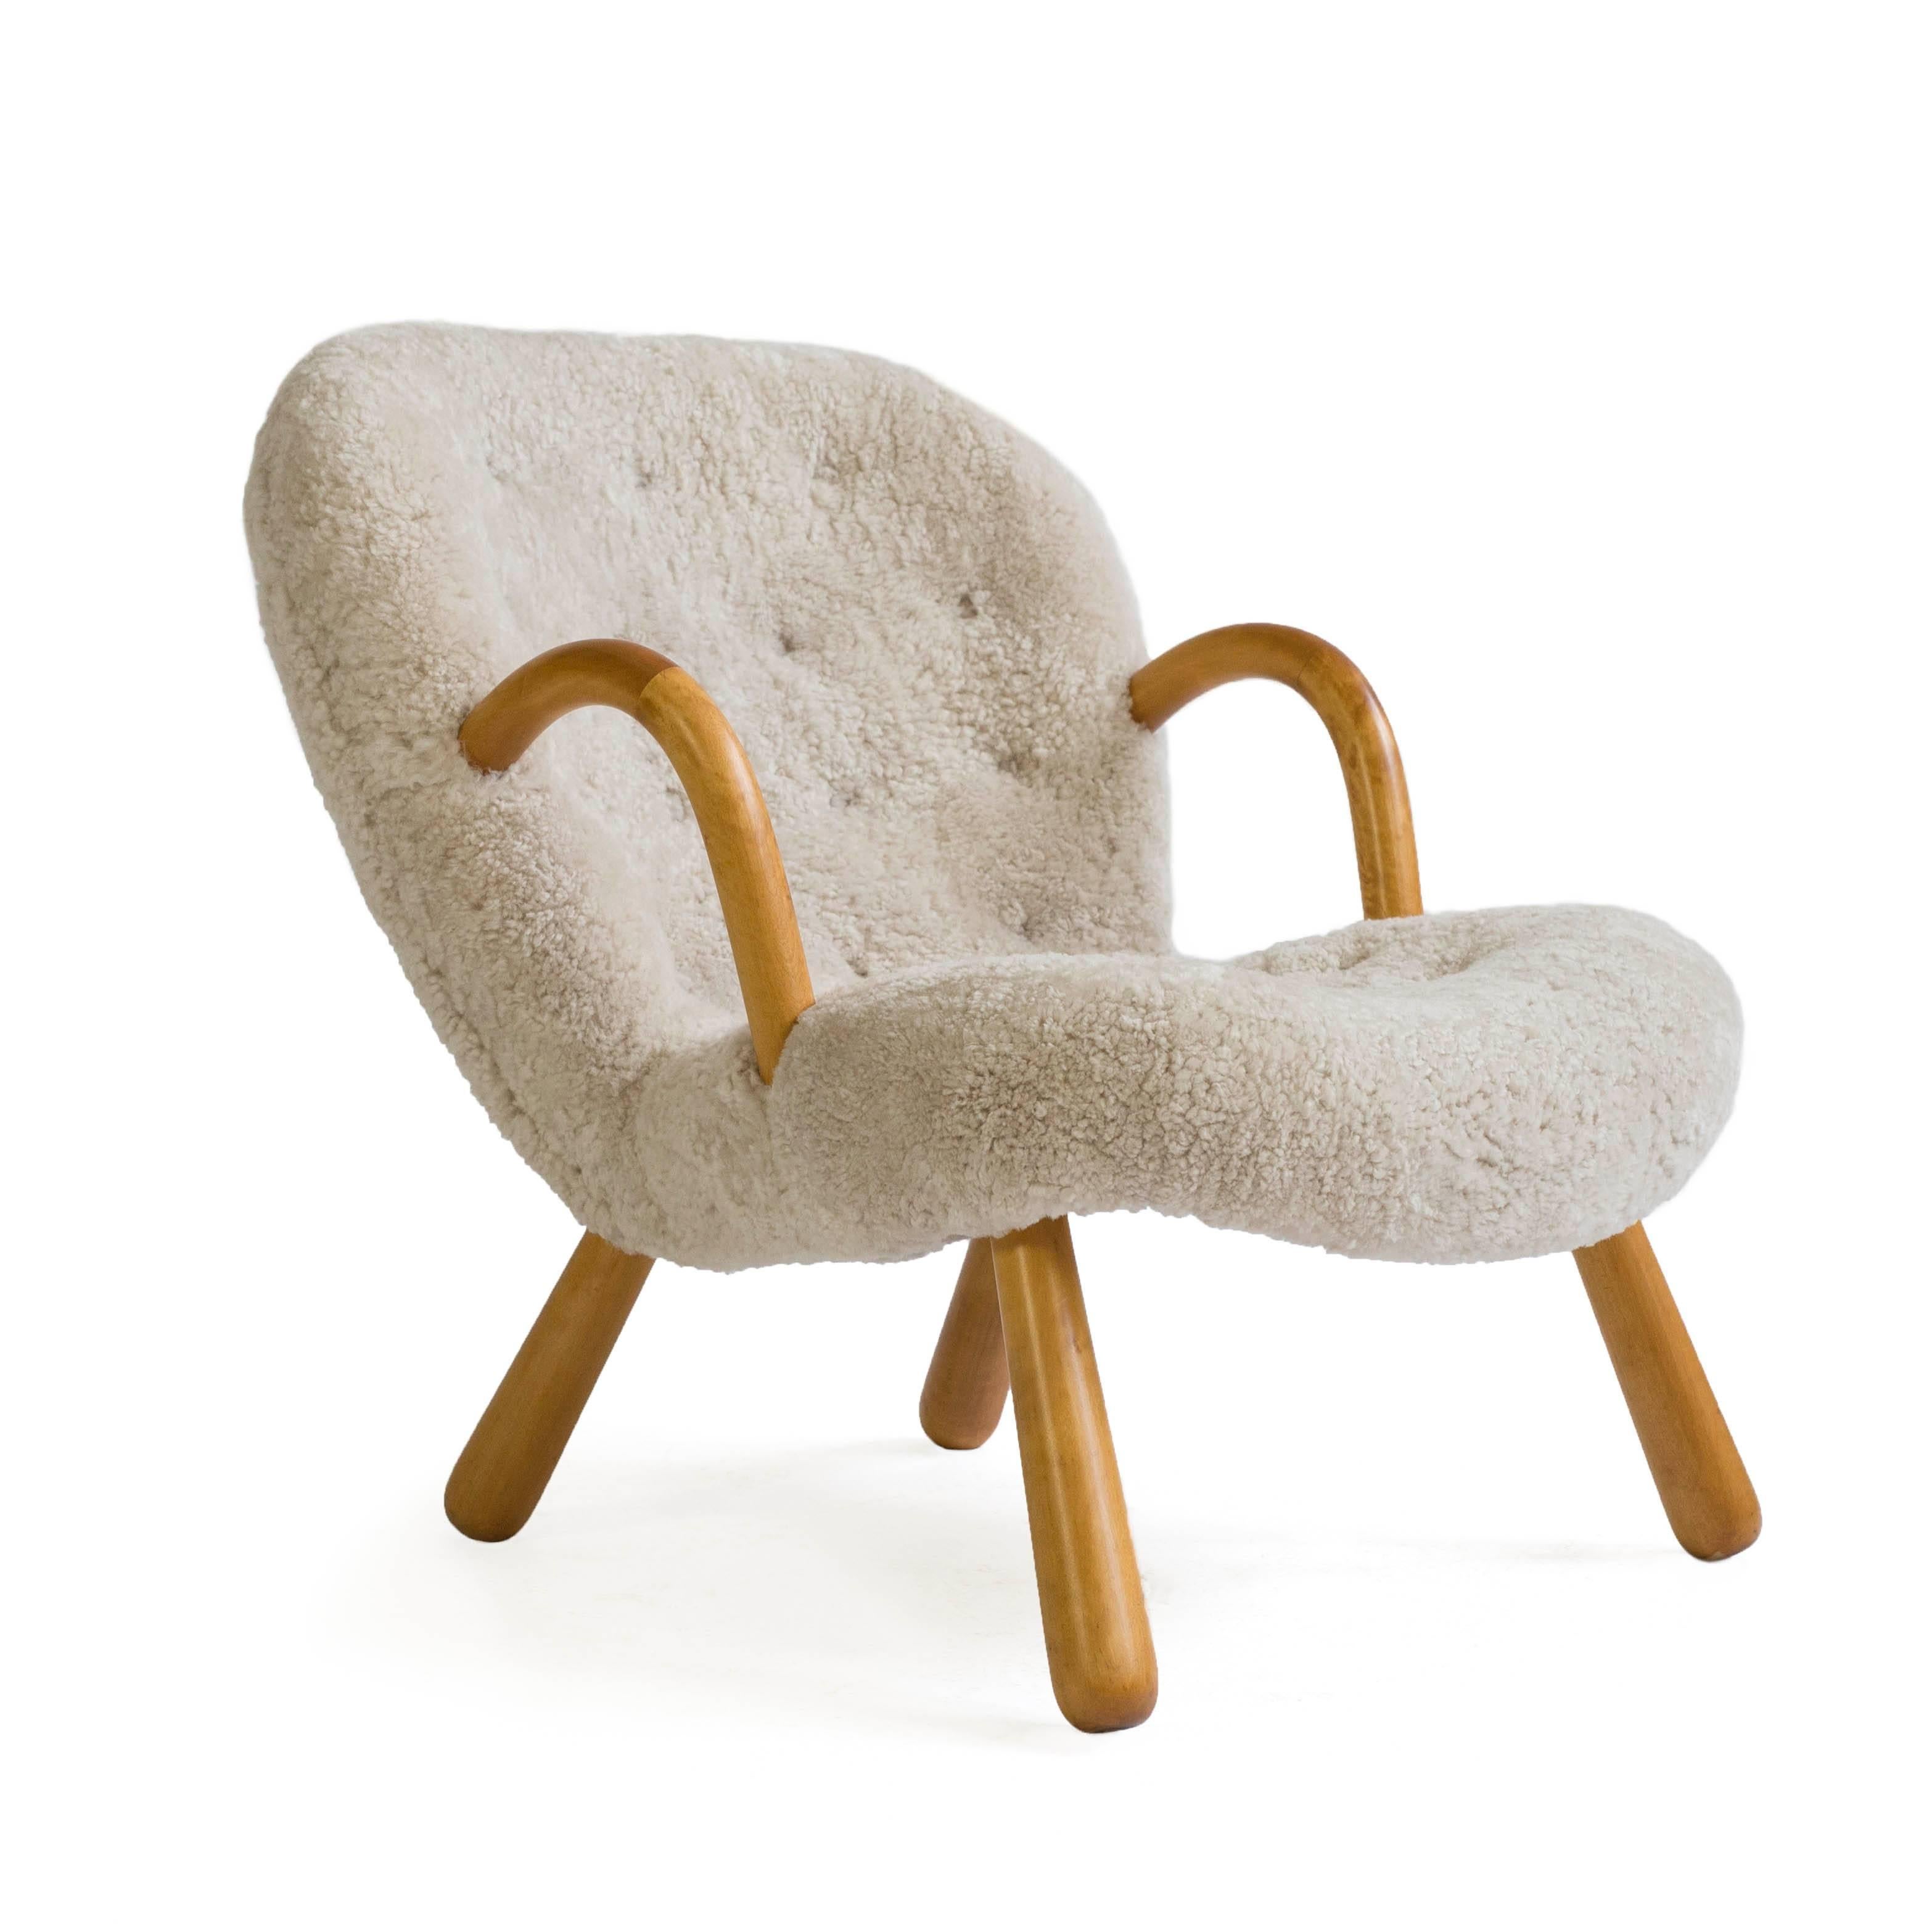 A Philip Arctander clam chair with legs of birch upholstered with sheep skin. 

Designed by Philip Arctander, Denmark 1944 and manufactured by Nordisk Stål & Møbel Central, Denmark.